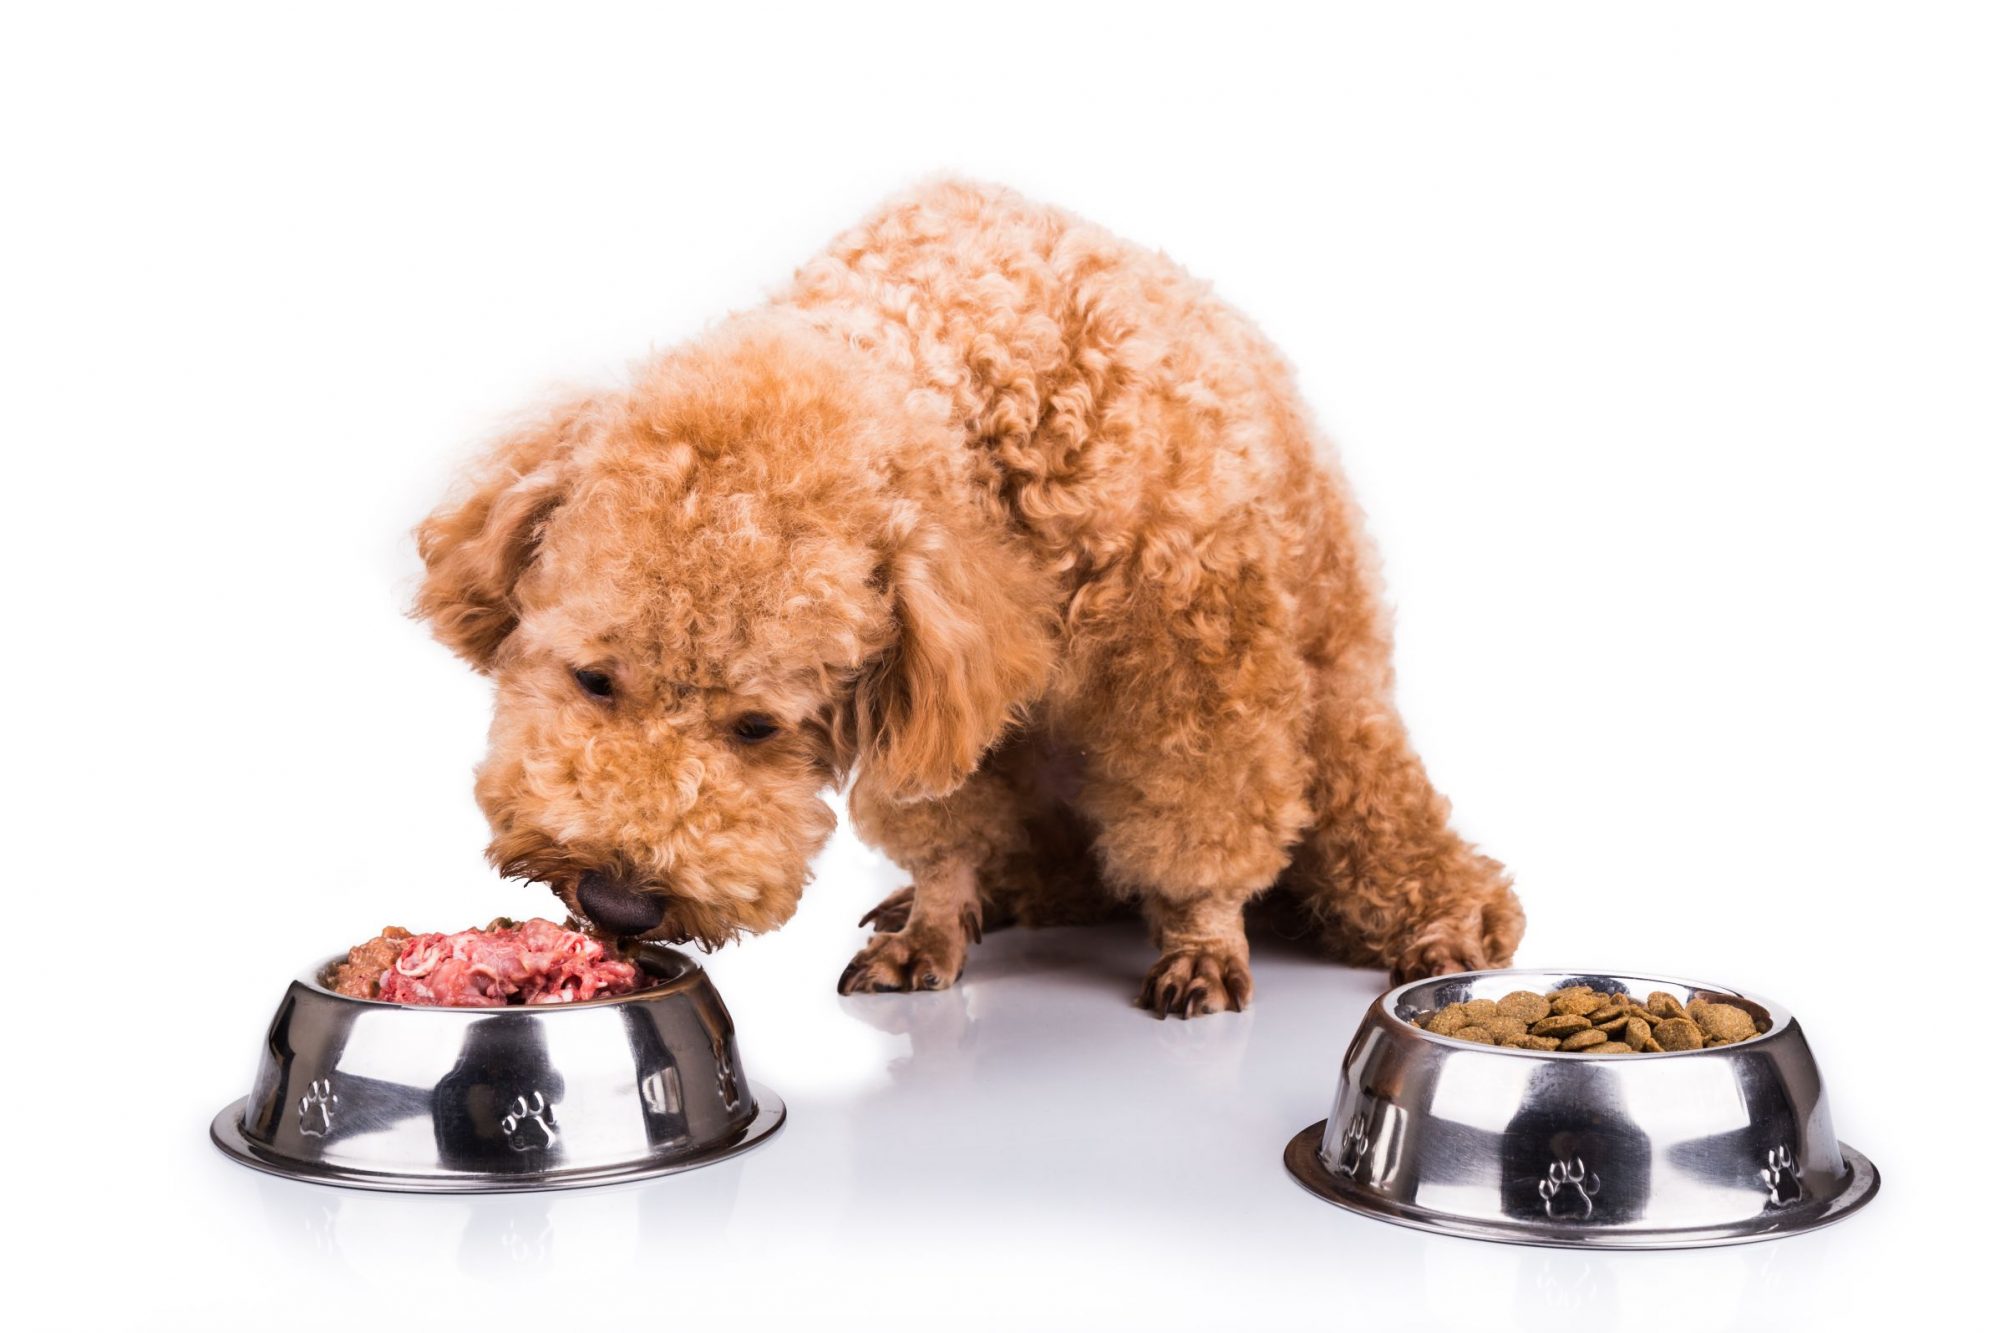 Poodle dog eating wet food instead of the dry food